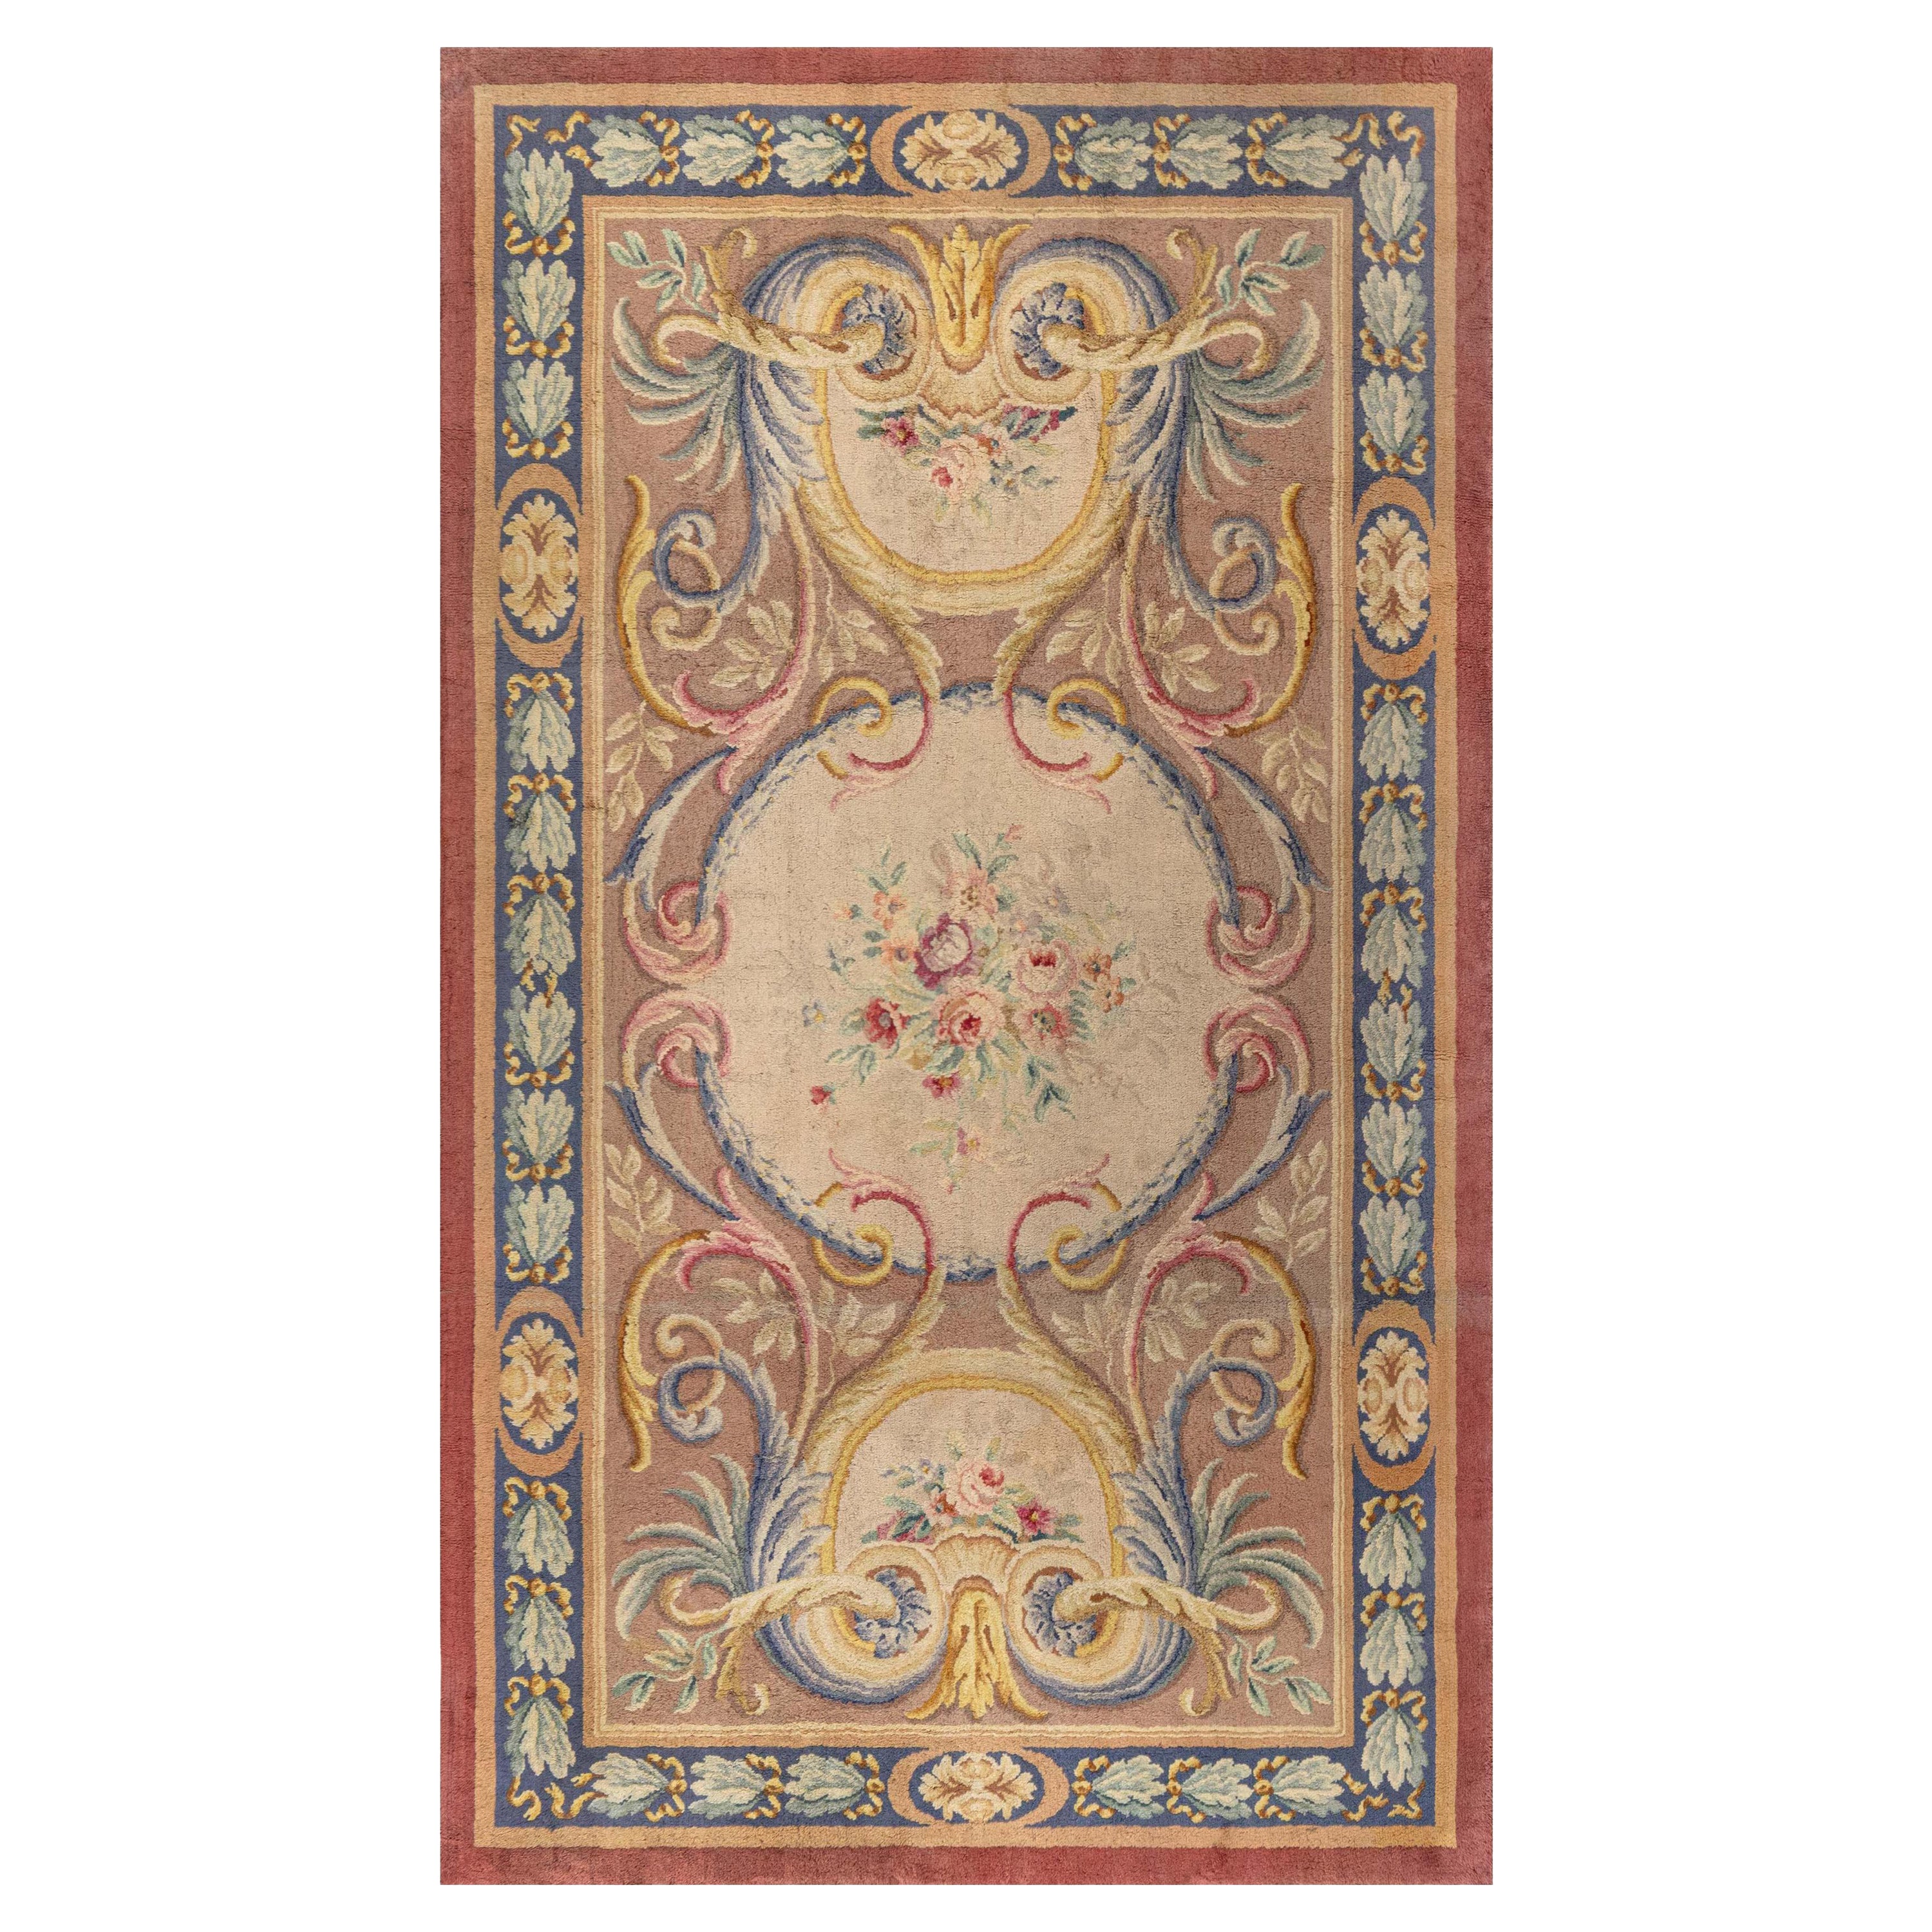 Early 20th Century Classic French Savonnerie Rug